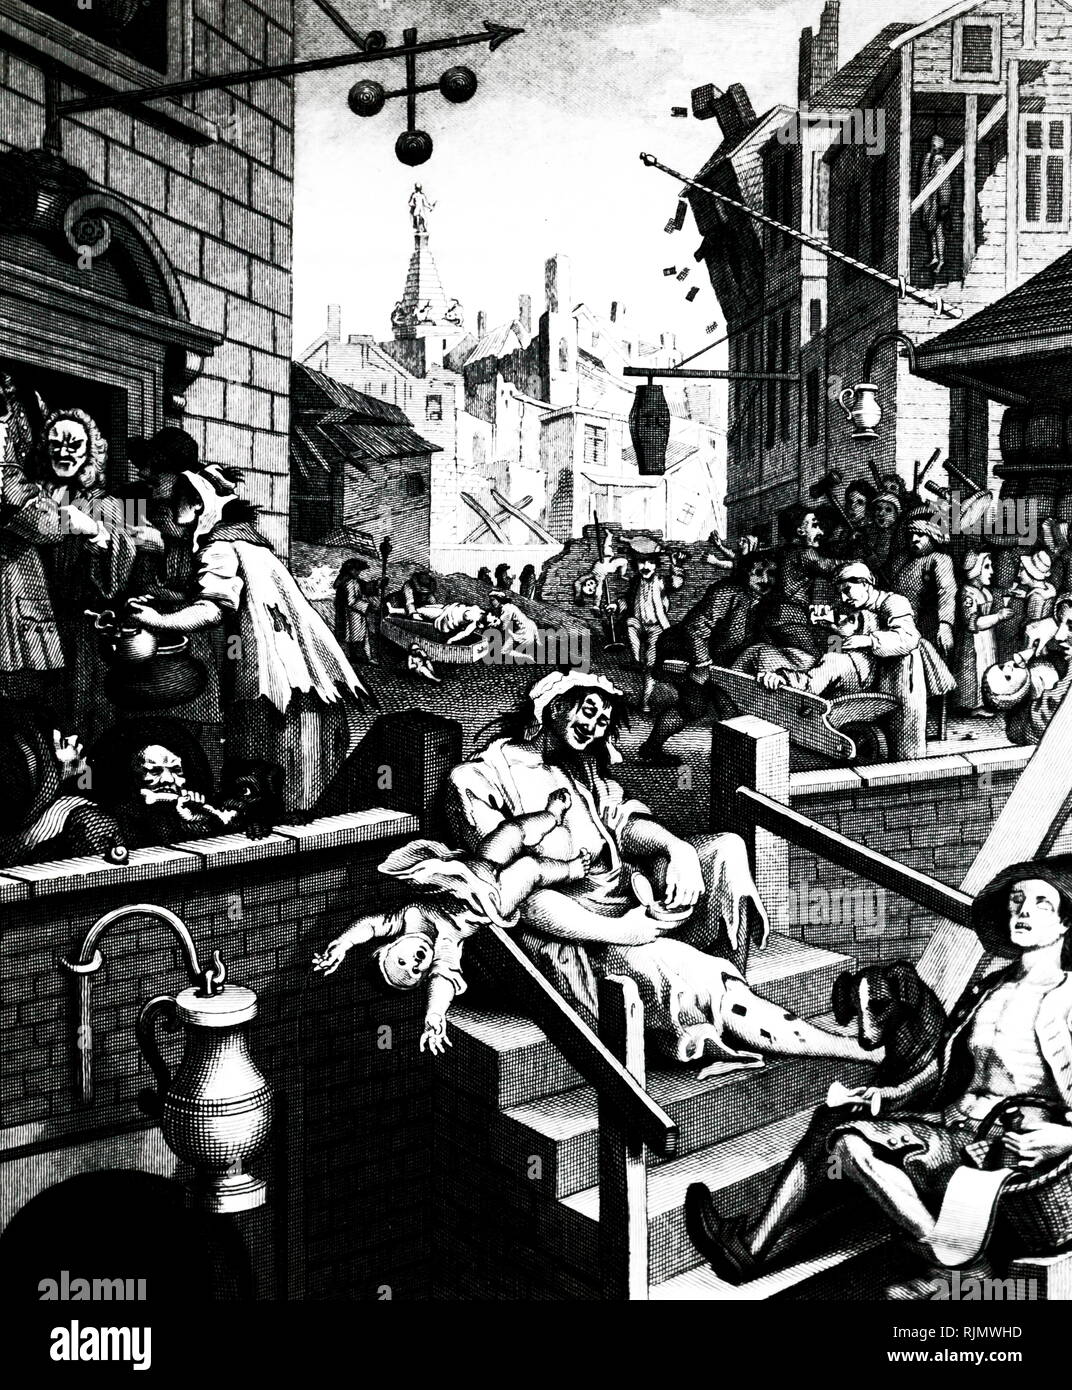 Engraved An engraving 'Gin Lane' by William Hogarth (1697-1764), showing the evils of unbridled drinking of spirits. Drinking eased the miseries of poverty, but worsened rather than improved the affliction. Stock Photo